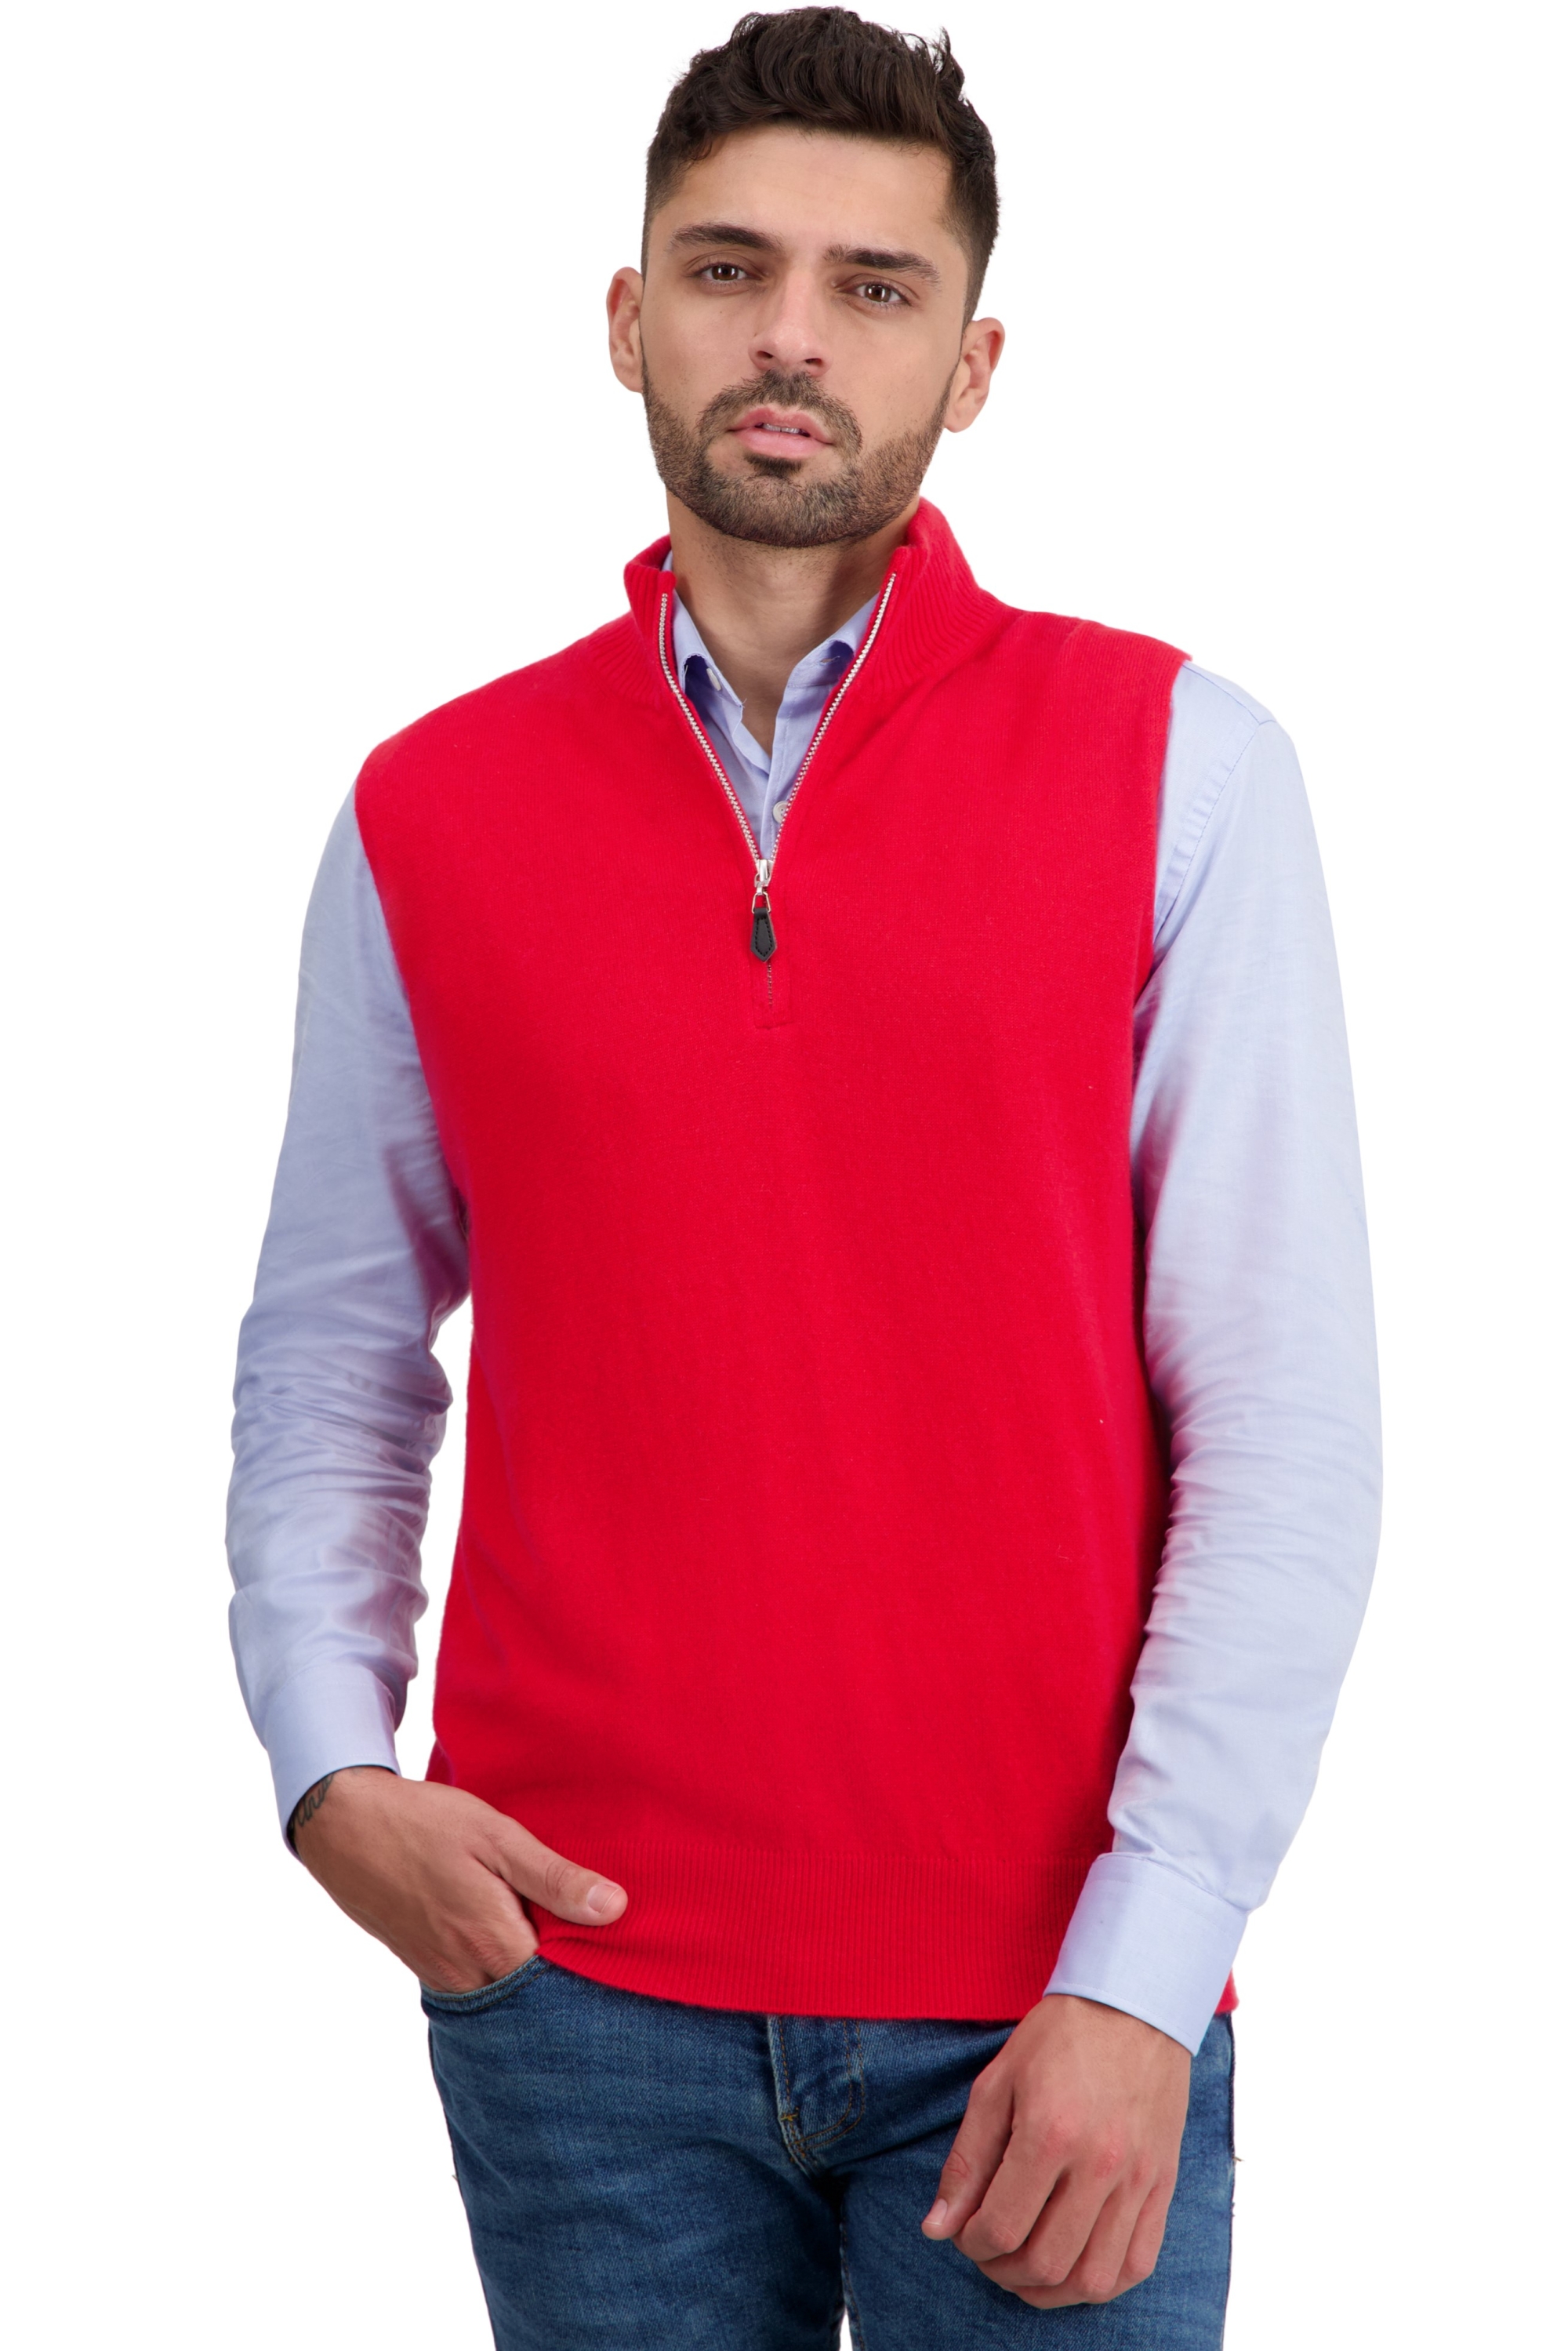 Cashmere men polo style sweaters texas rouge m